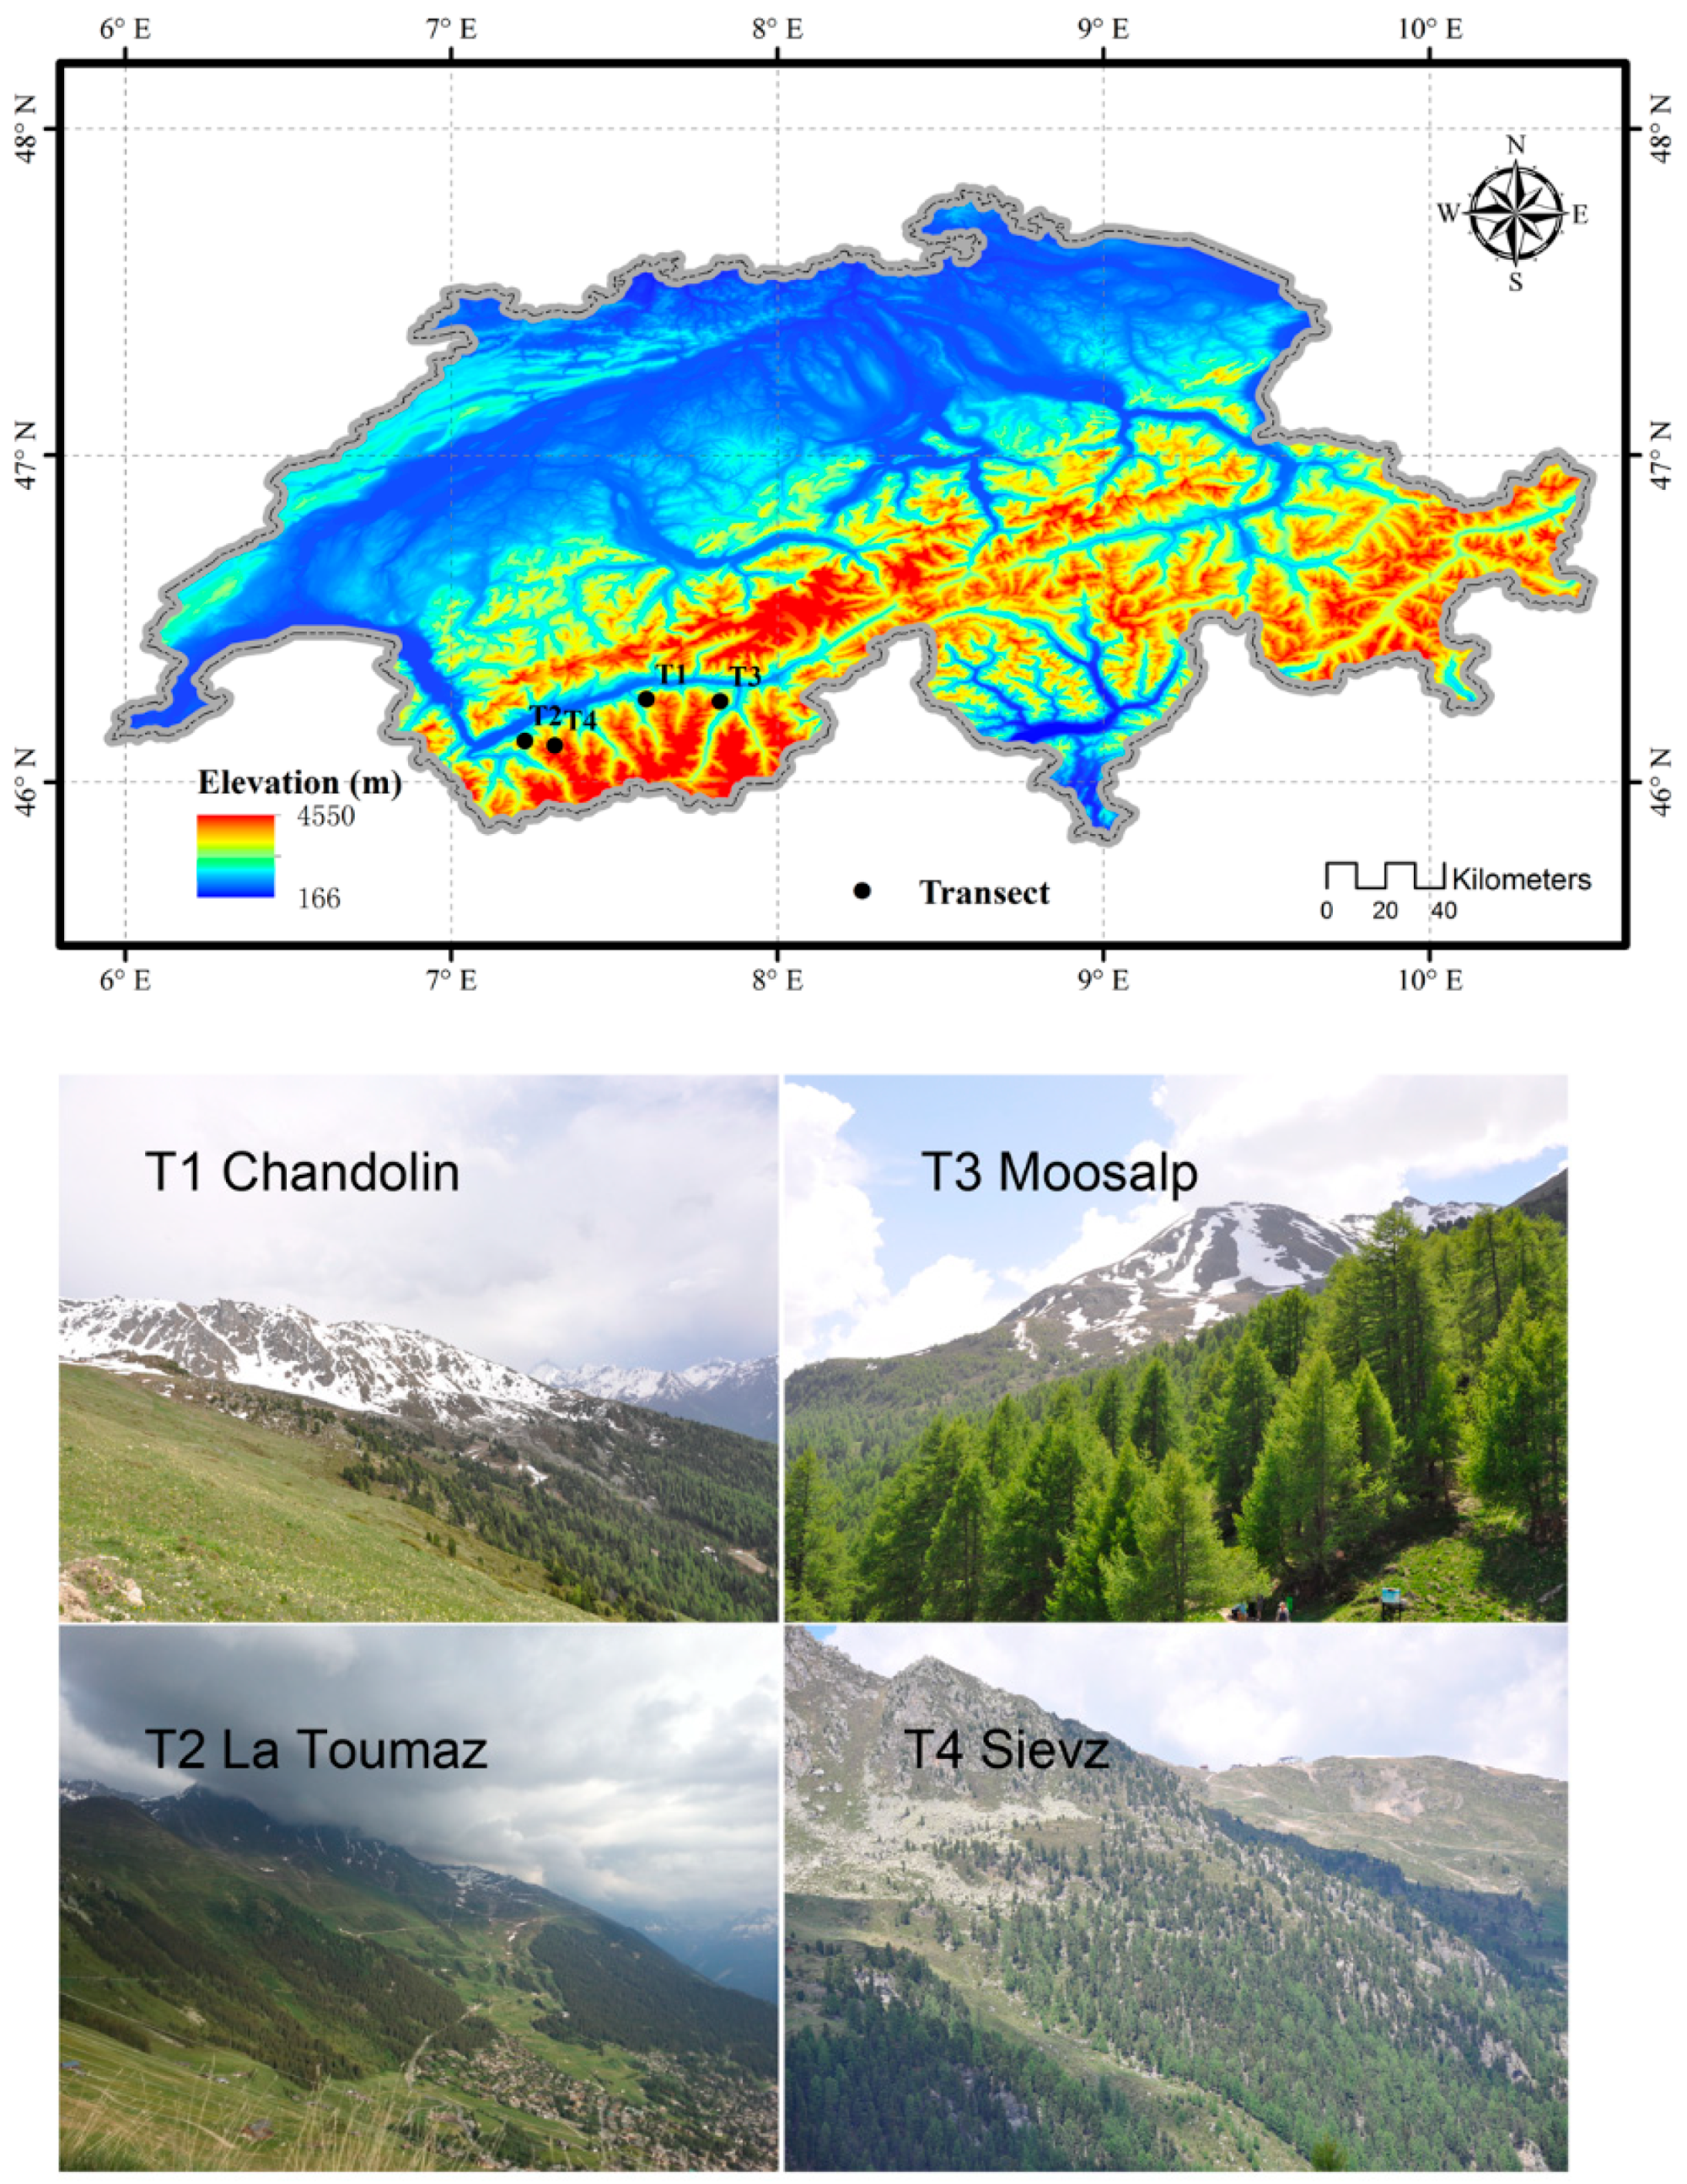 Forests | Free Full-Text | No Ontogenetic Shifts in C-, N- and P-Allocation  for Two Distinct Tree Species along Elevational Gradients in the Swiss Alps  | HTML